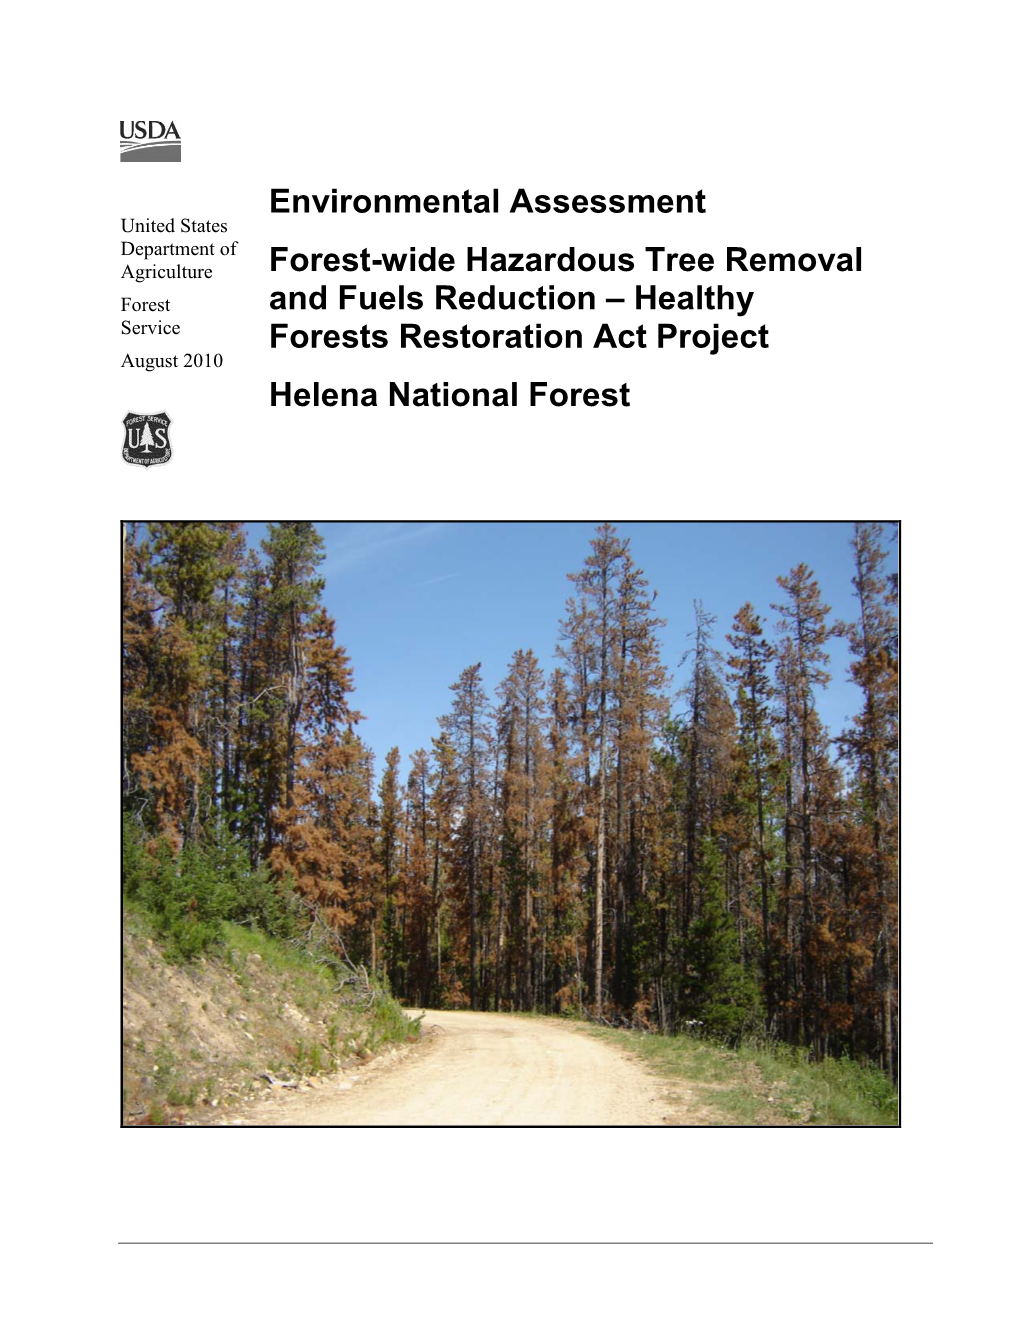 Environmental Assessment Forest-Wide Hazardous Tree Removal and Fuels Reduction